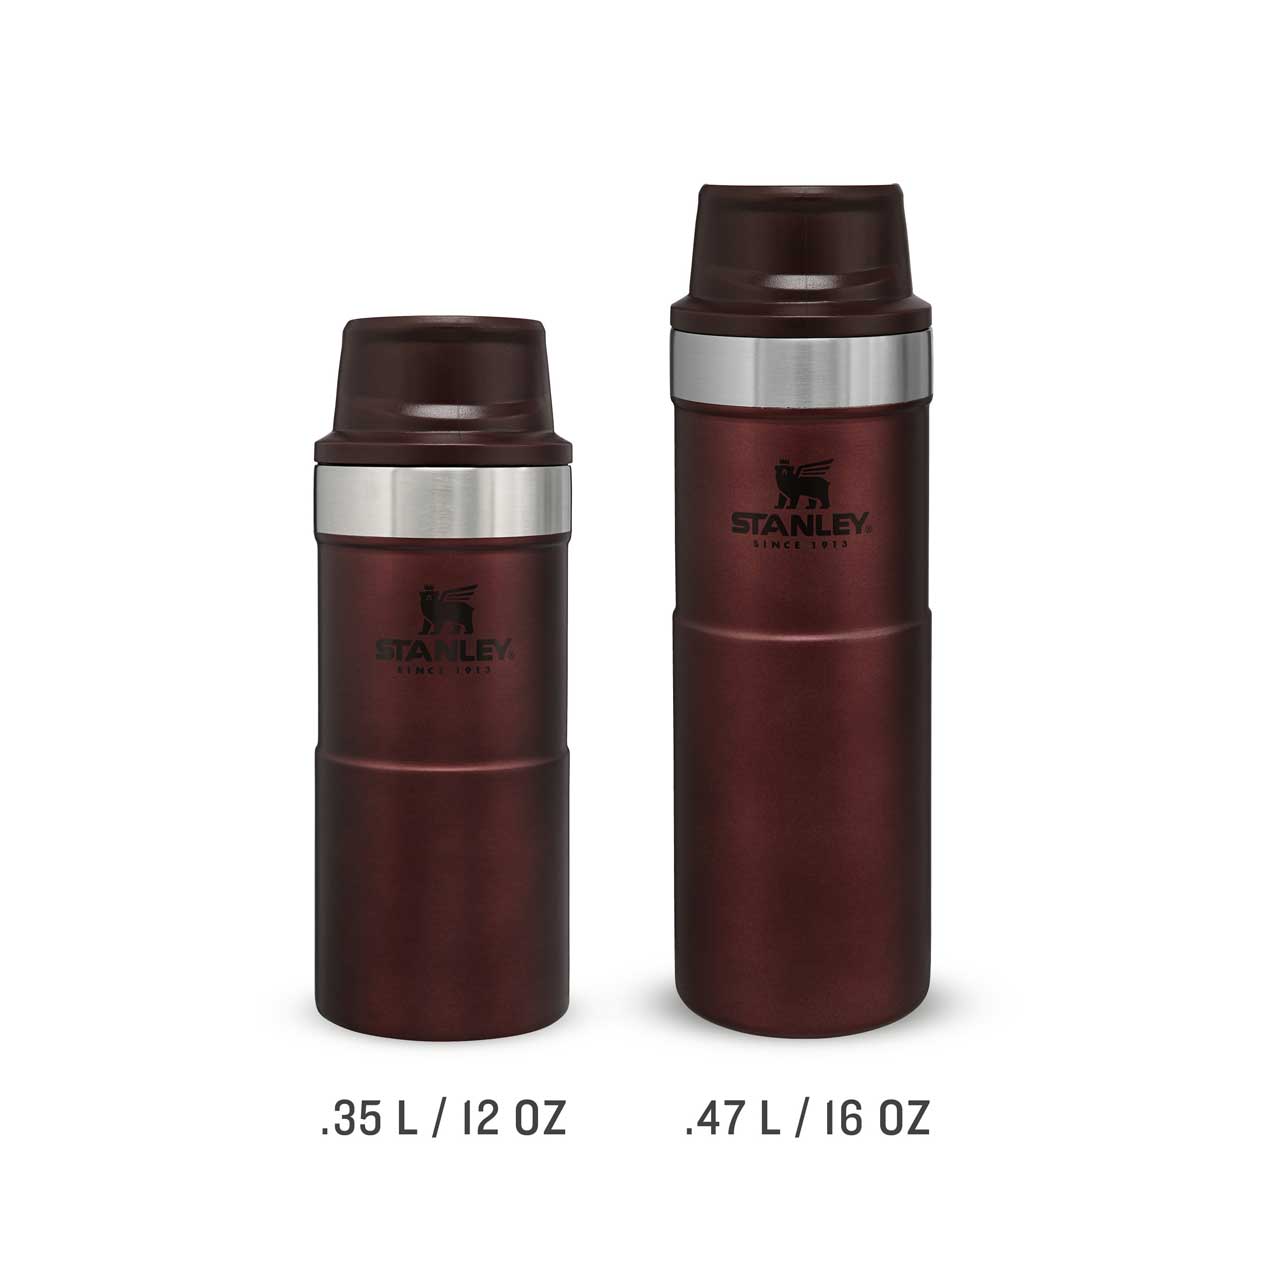 Stanley Trigger Action Travel Mug Replacement Lid: The Perfect Solution for On-the-Go Beverage Enjoyment